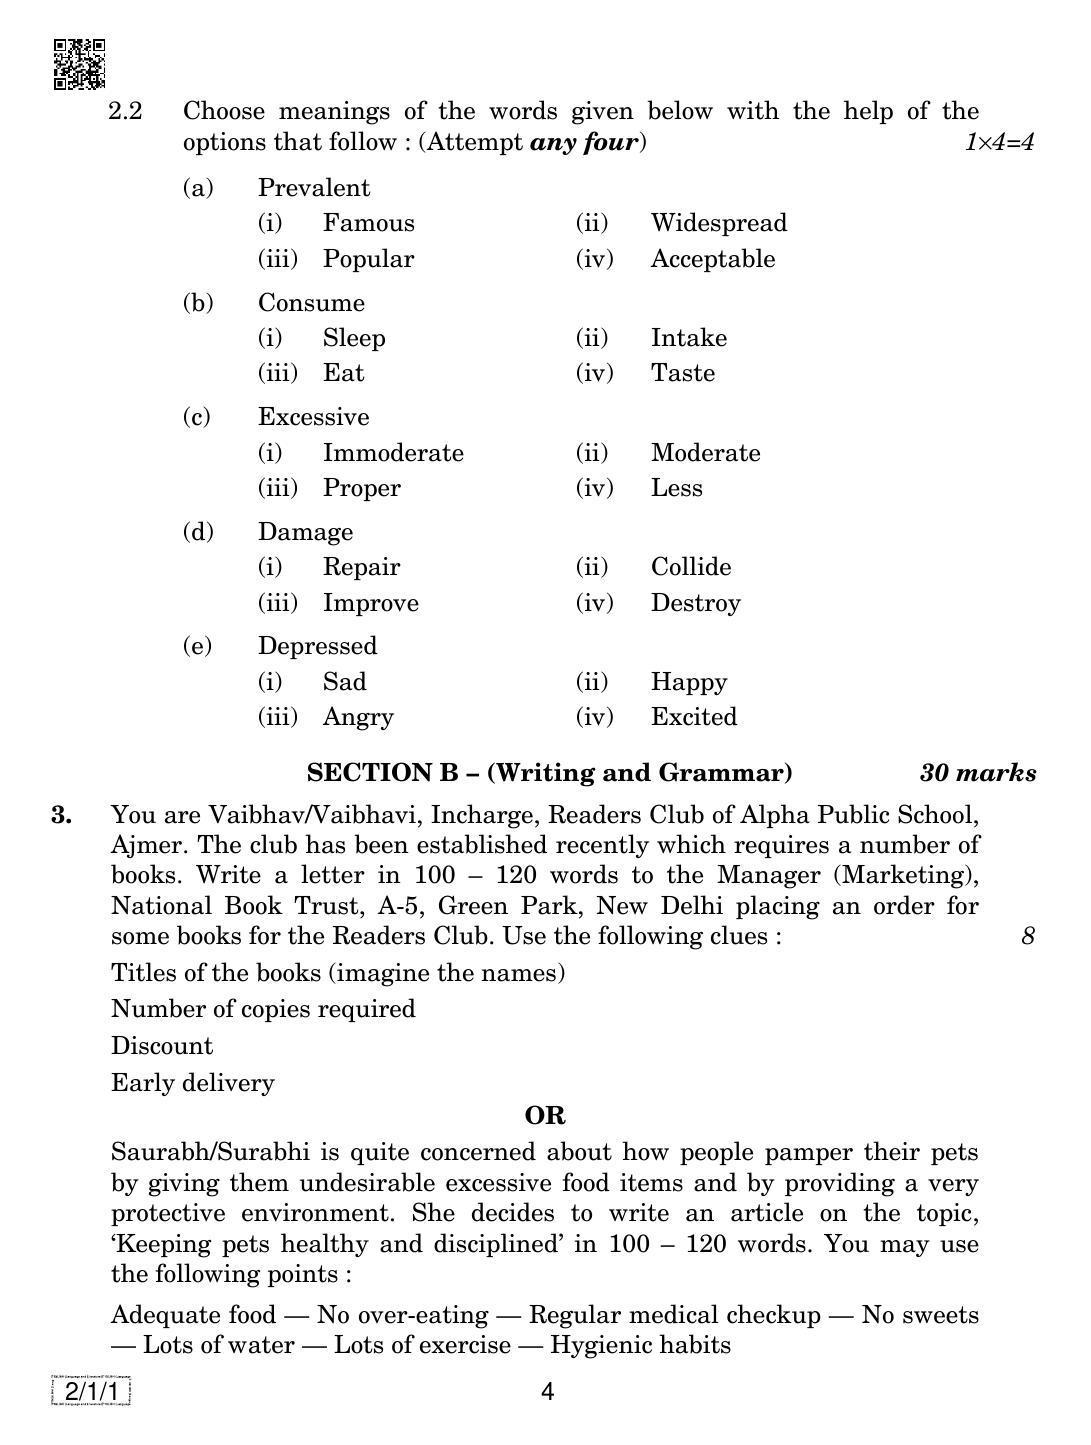 CBSE Class 10 2-1-1 ENGLISH LANG. & LIT. 2019 Compartment Question Paper - Page 4